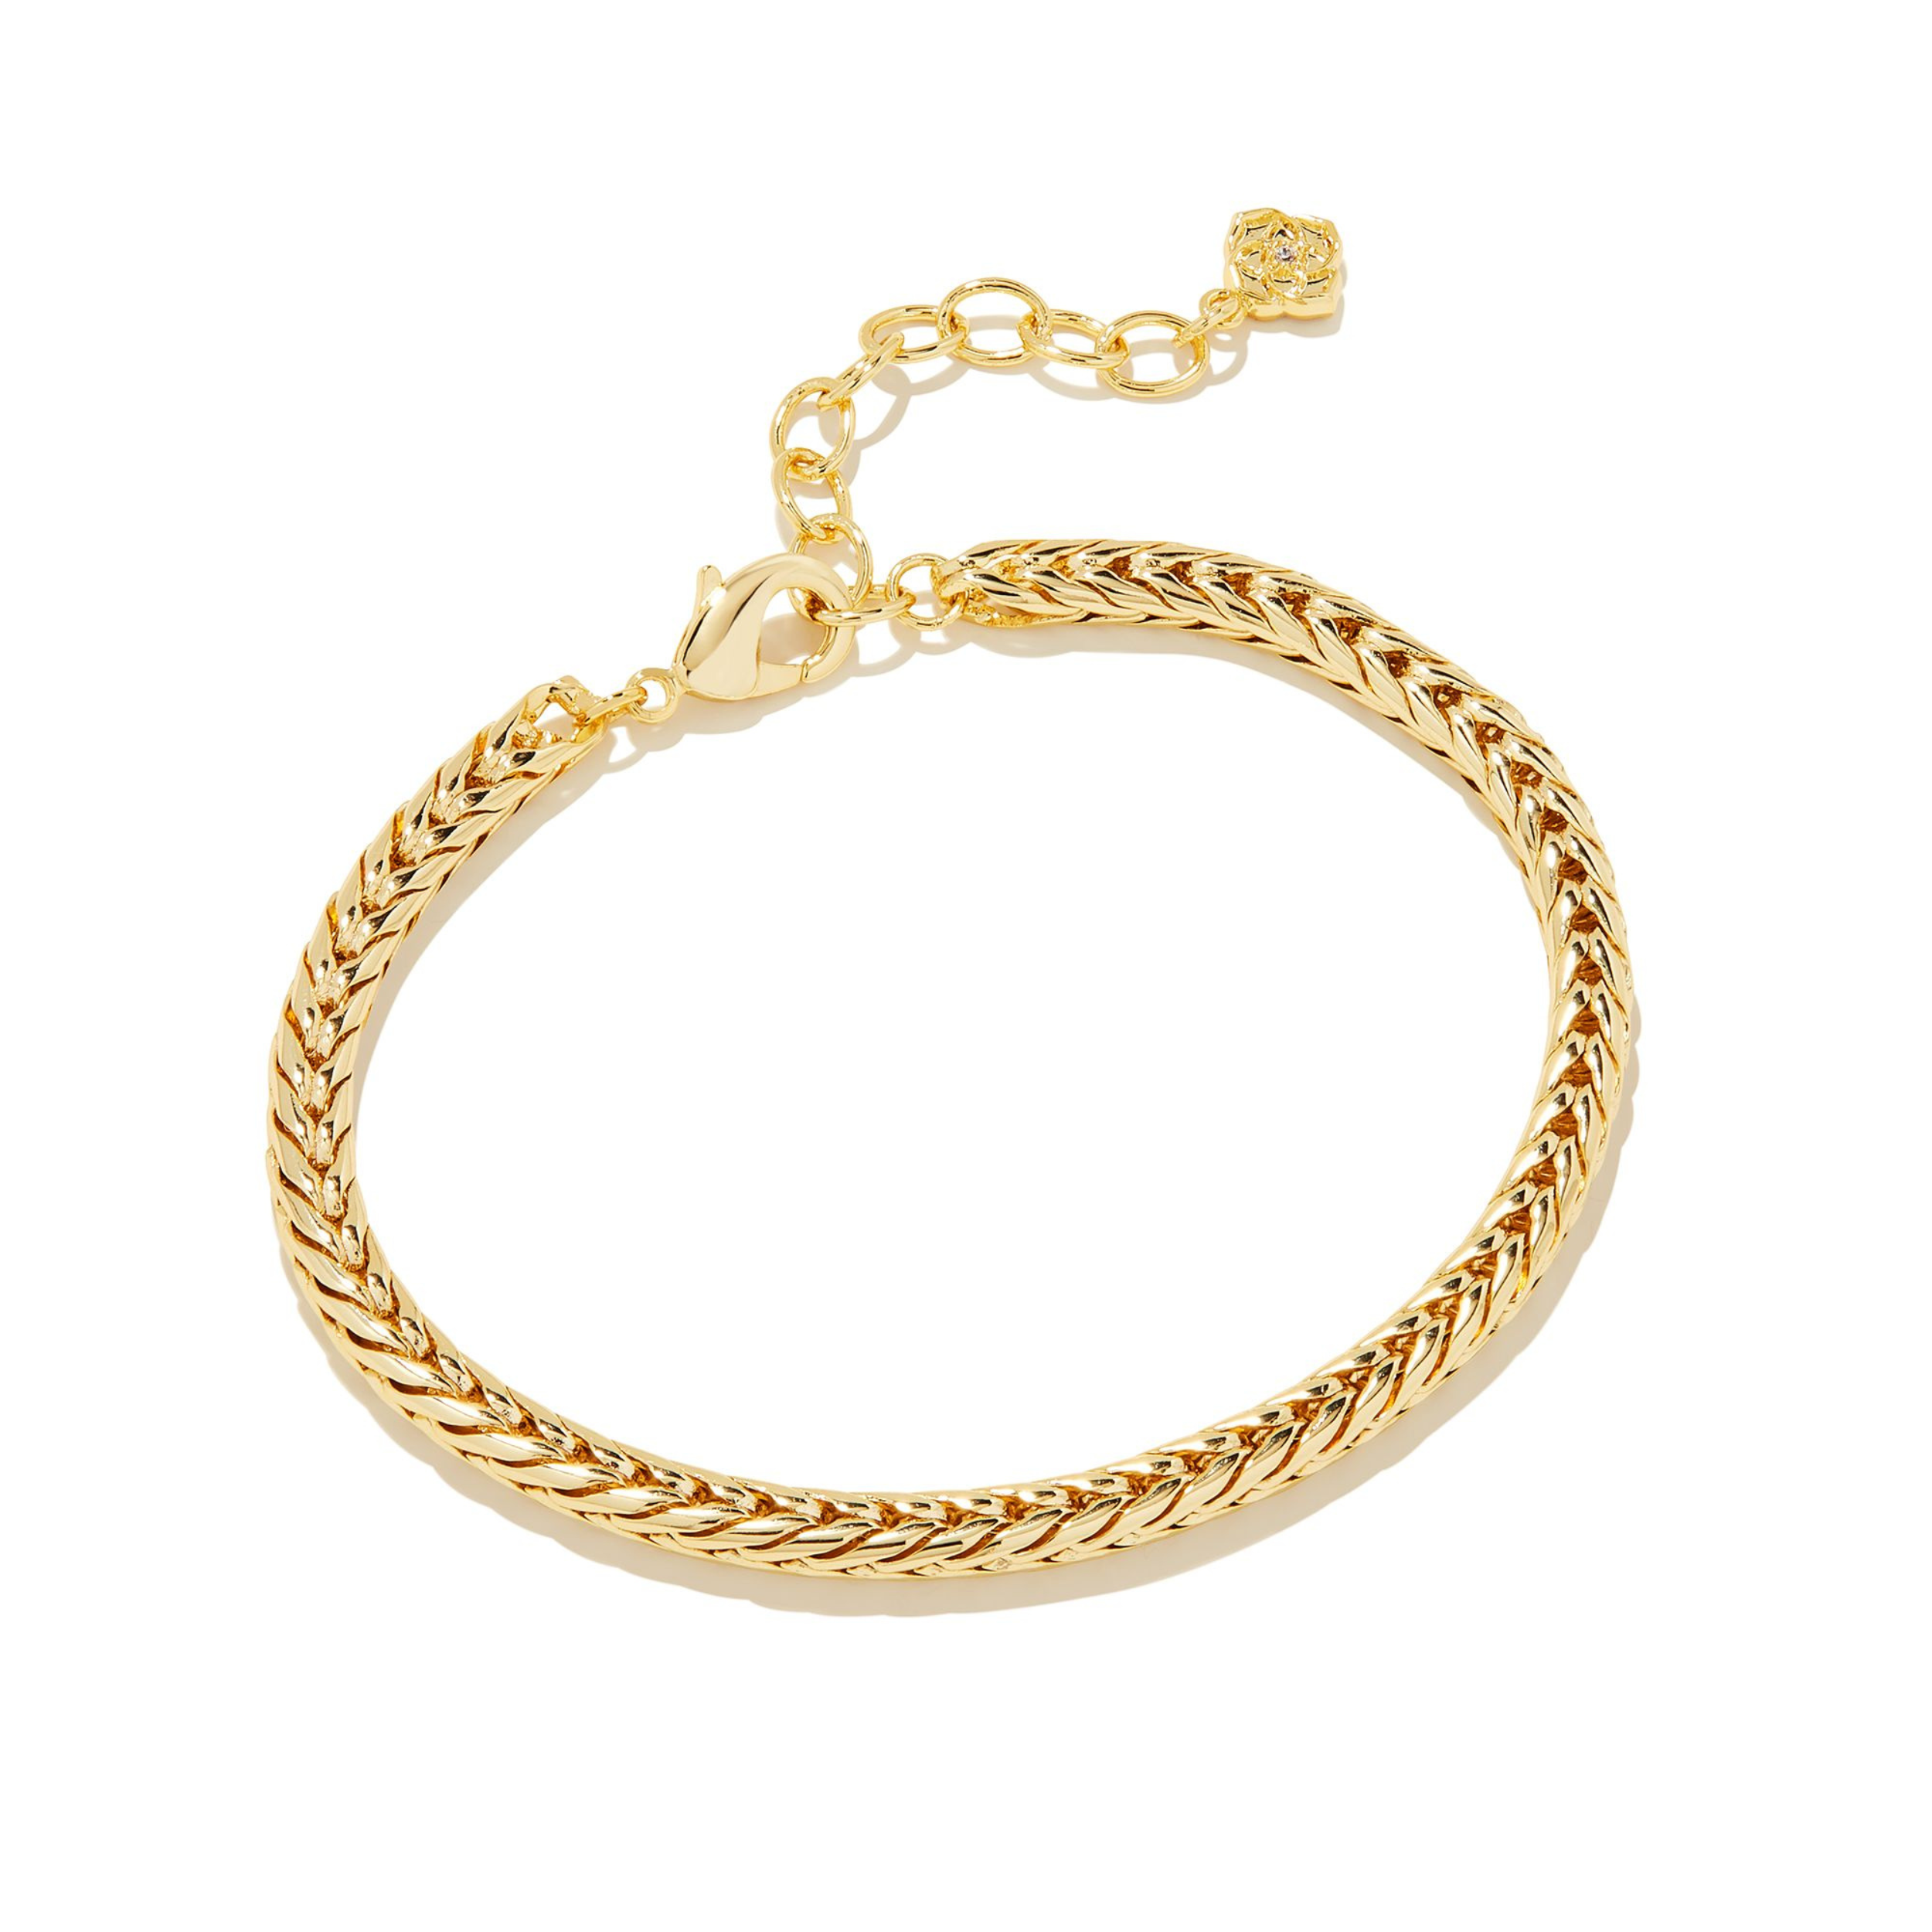 Gold chain bracelet pictured on a white background. 